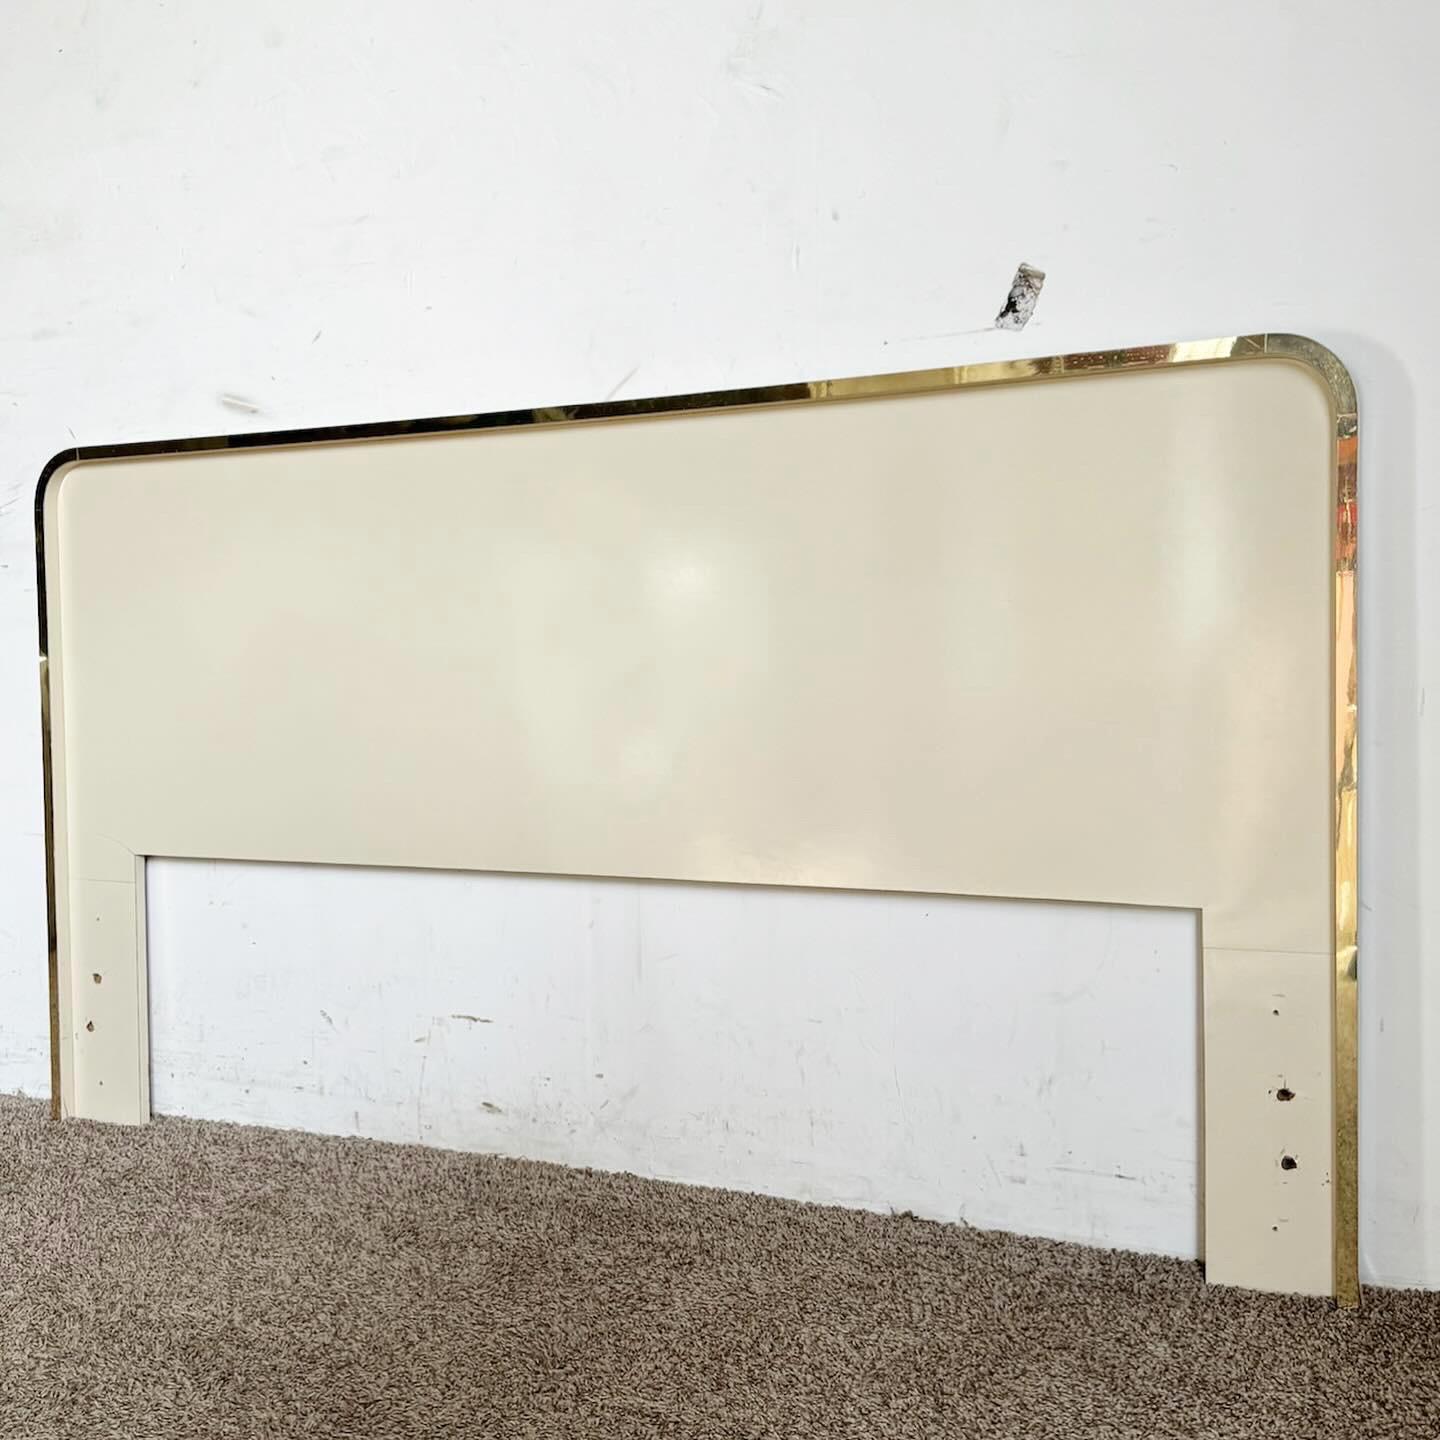 Wood Postmodern Cream Lacquer Laminate Waterfall Queen Headboard With Gold Trim For Sale